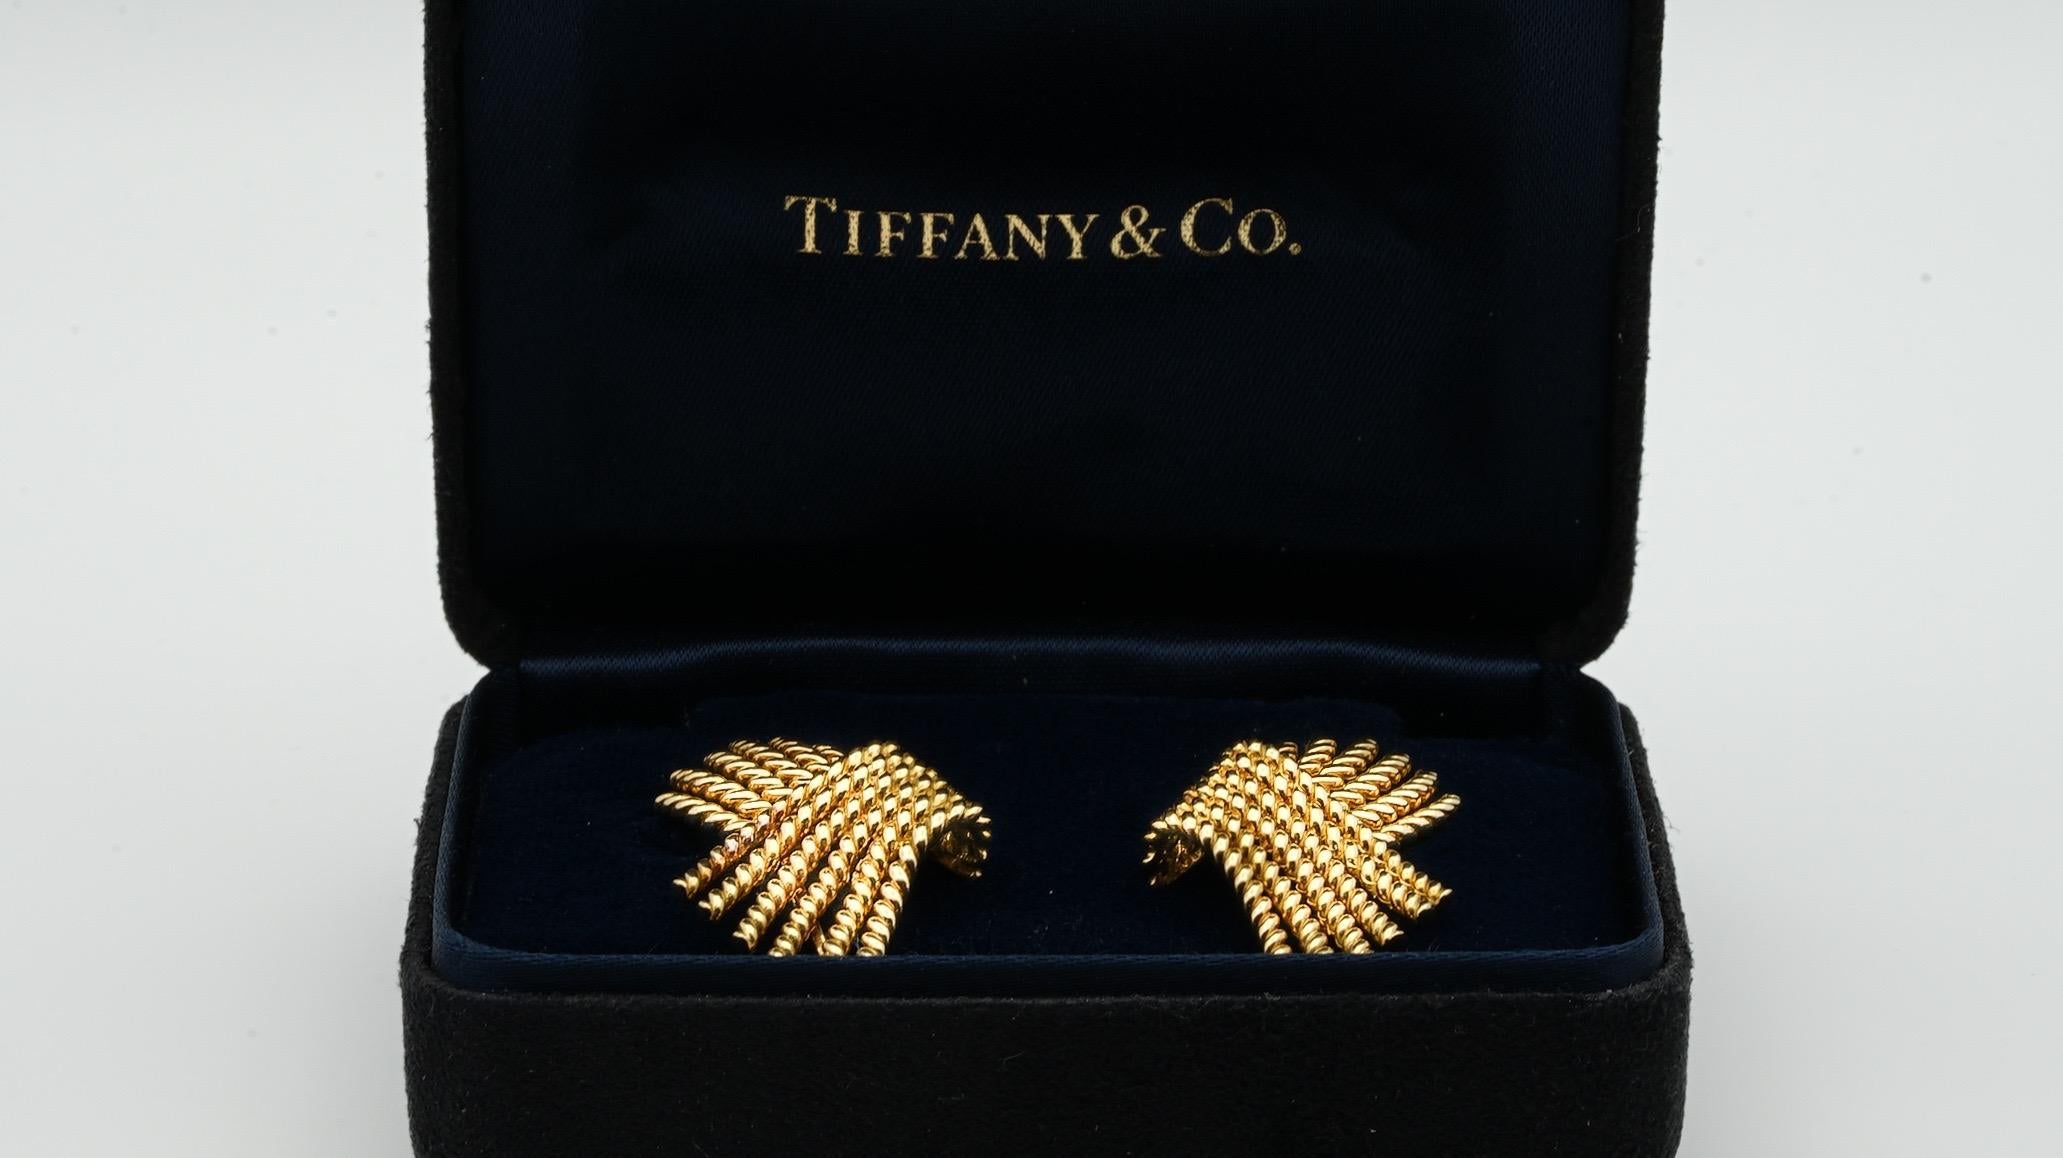 Pair of Schlumberger for Tiffany & Co. 18 Karat Yellow Gold ear clips from the 1970's.

Hallmarks: Tiffany & Co. Schlumberger 750 
Total approx. weight of ear clips is 16.32 grams (gross)
Dimensions: ear clips measure approx. 0.78